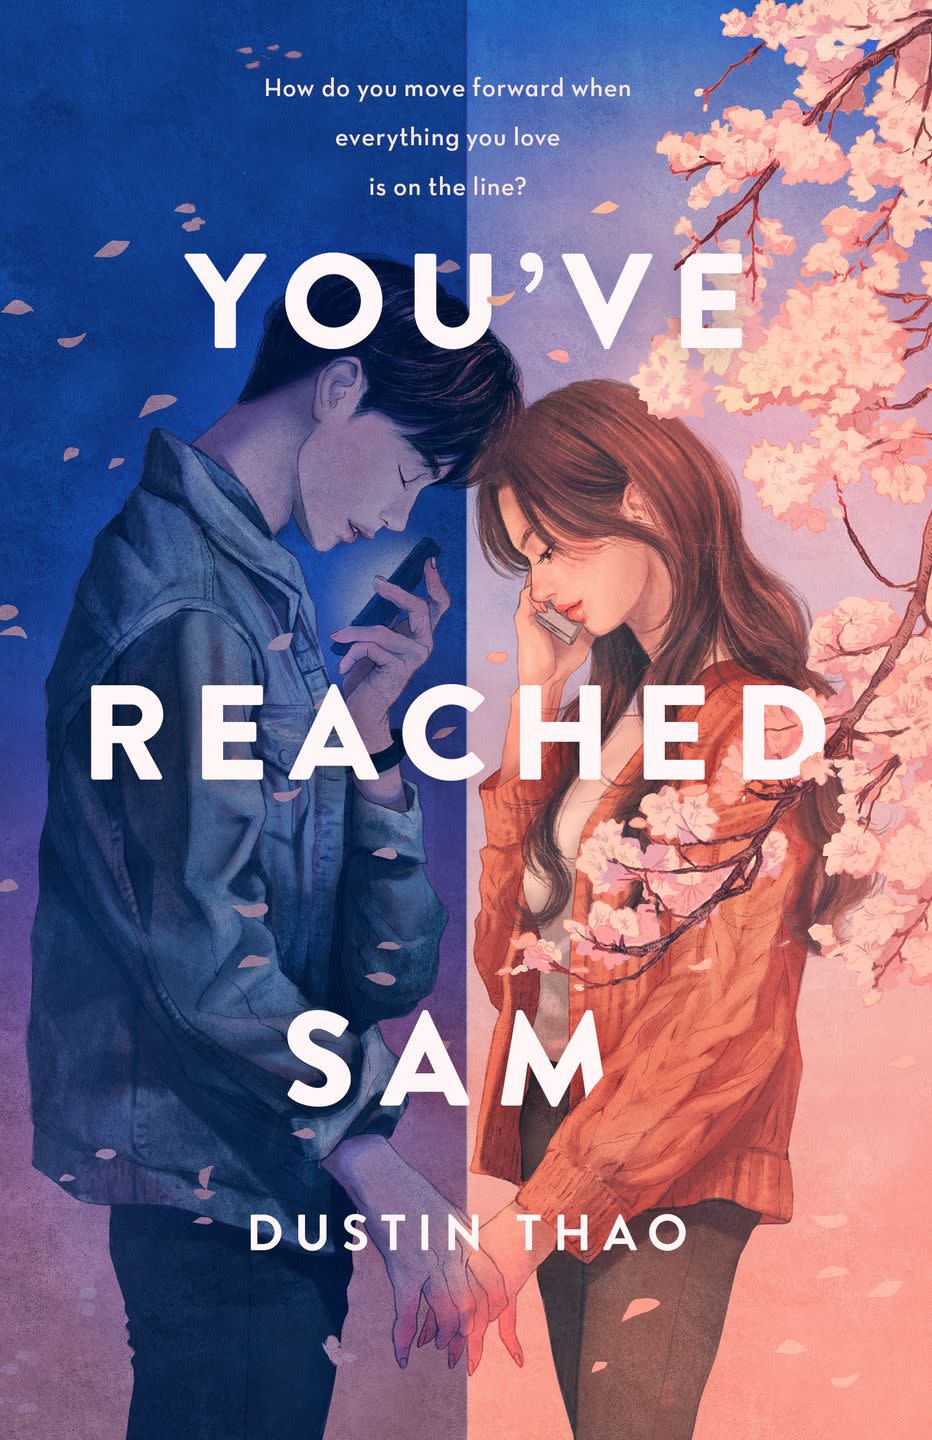 46) “You've Reached Sam” by Dustin Thao